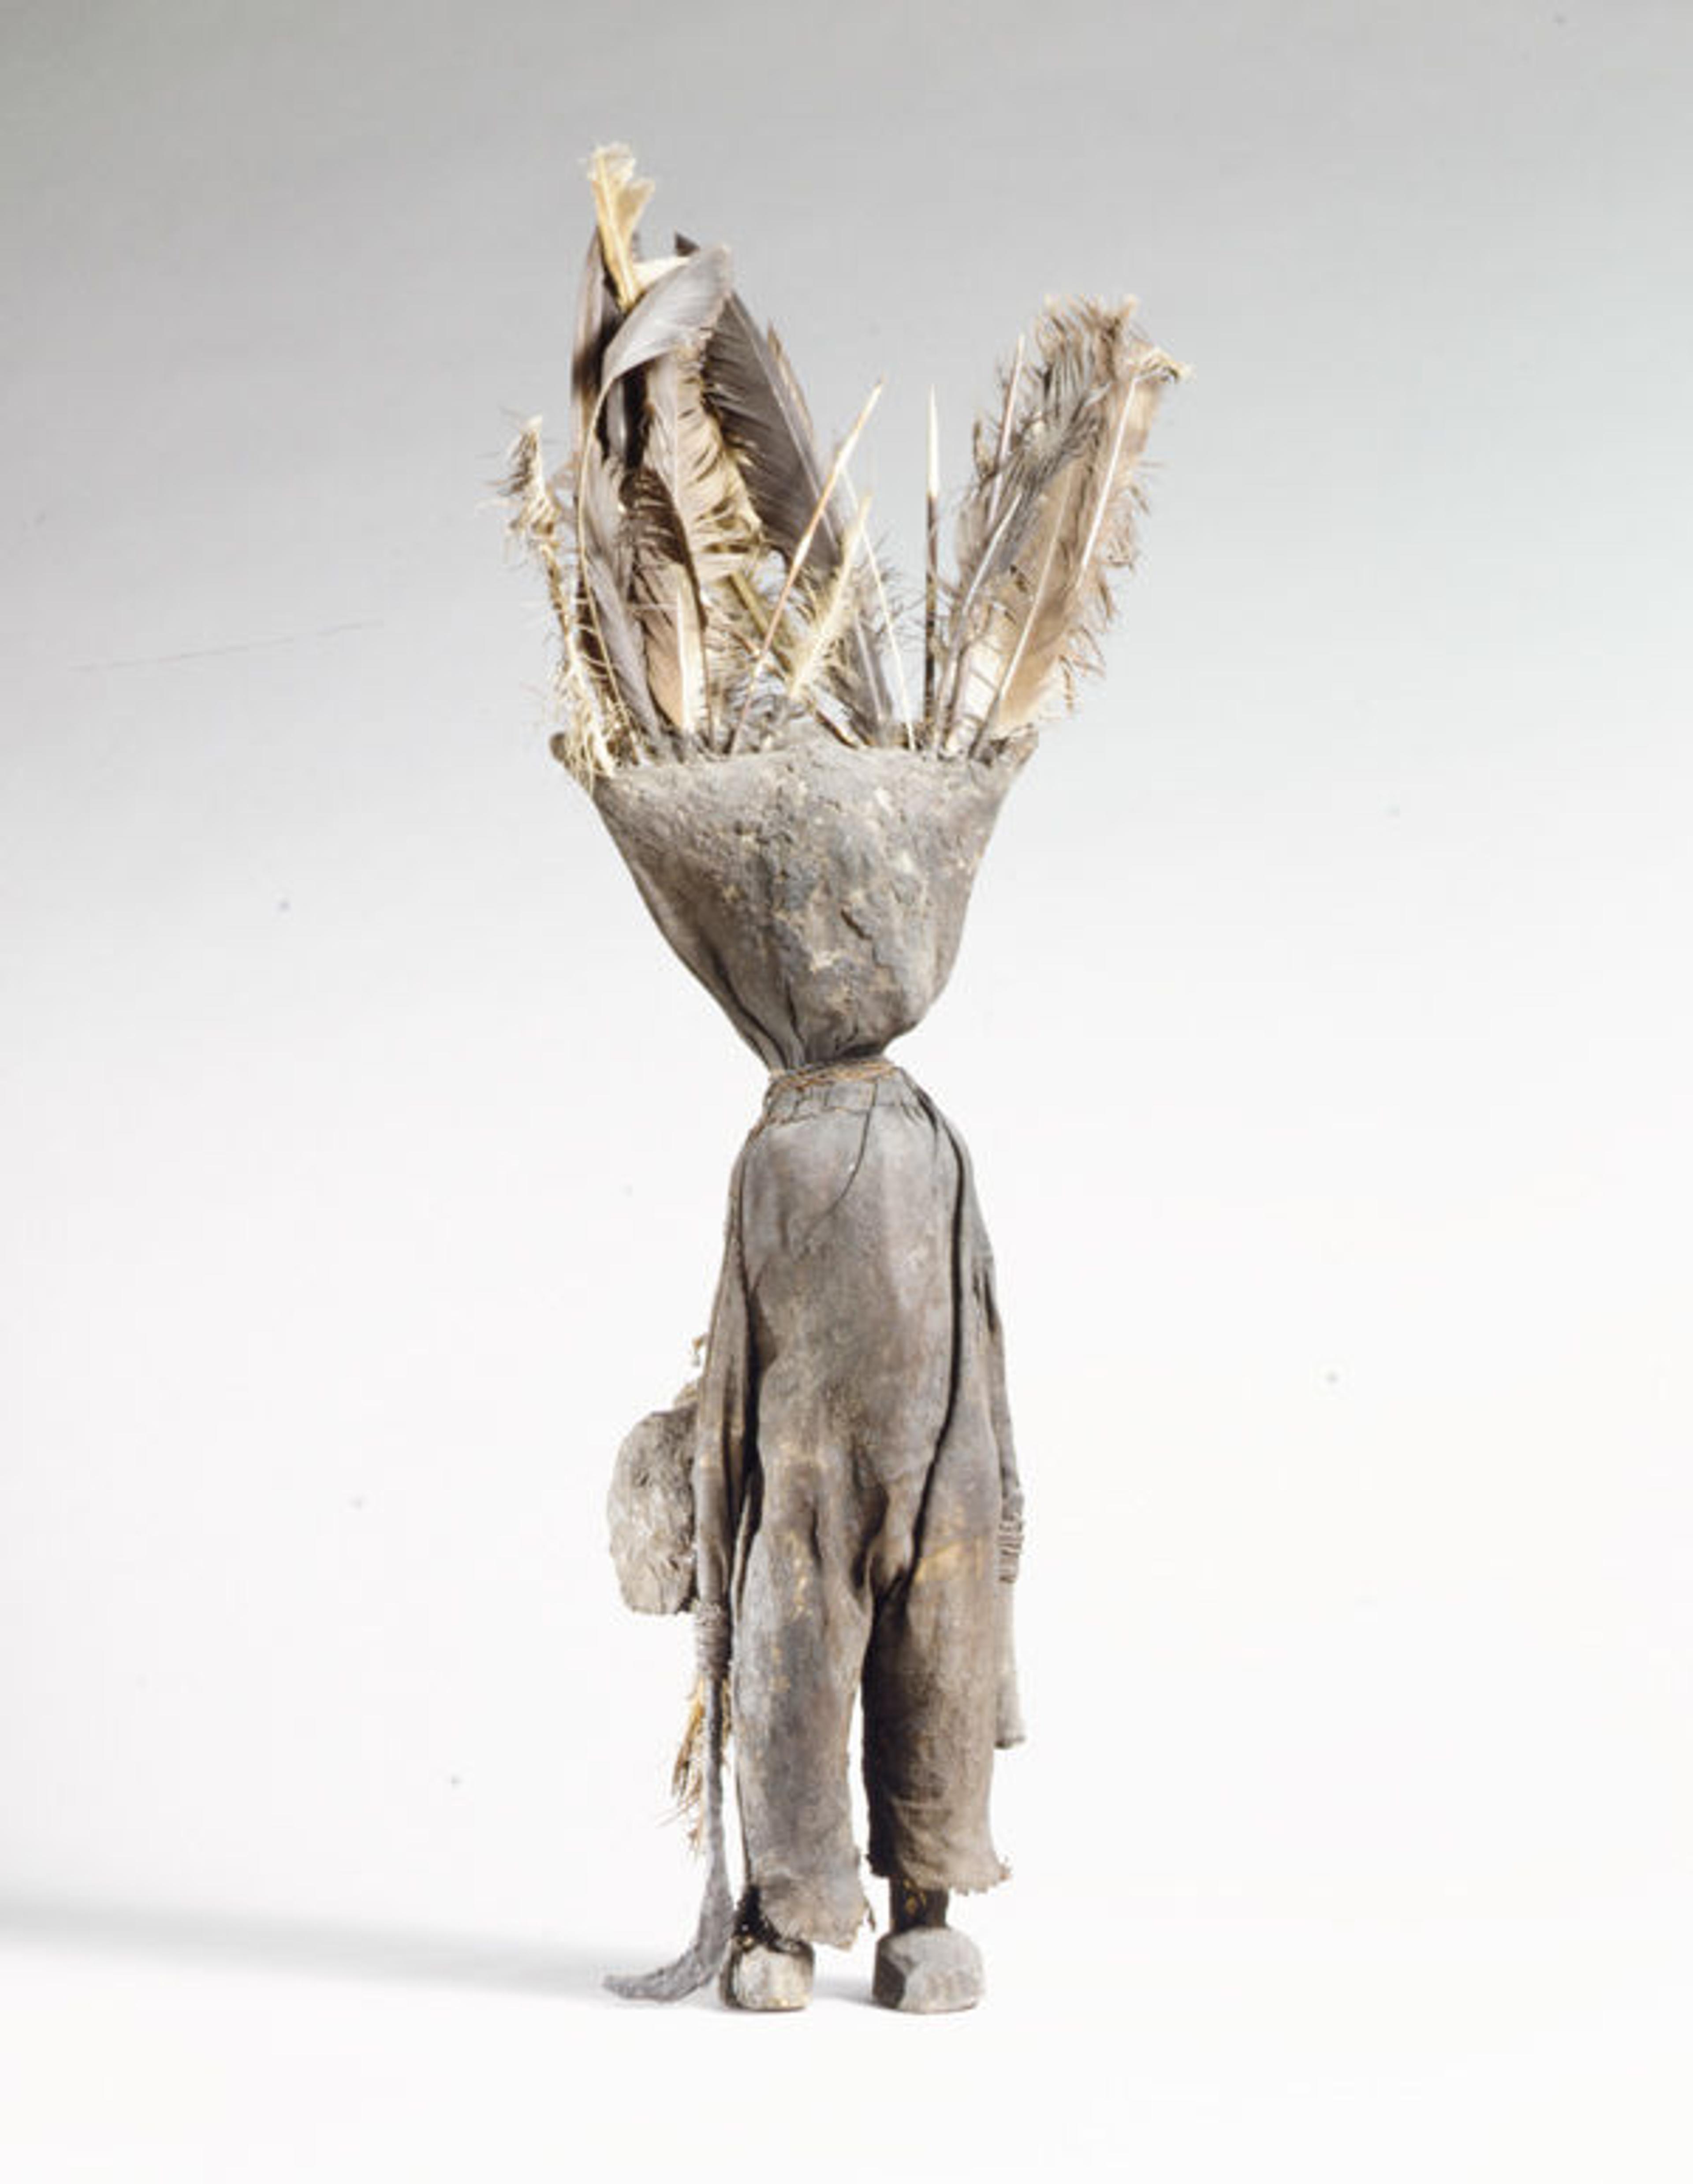 Oracle Figure (Kafigeledjo), 19th–mid-20th century. Côte d'Ivoire. Wood, iron, bone, porcupine quills, feathers, commercially woven fiber, organic material; H. 32 7/16 (82.5 cm) x W. 13 (33 cm) x D. 4 1/2 in (11.4 cm). The Metropolitan Museum of Art, New York, The Michael C. Rockefeller Memorial Collection, Gift of Mr. and Mrs. Raymond Wielgus, 1964 (1978.412.488)